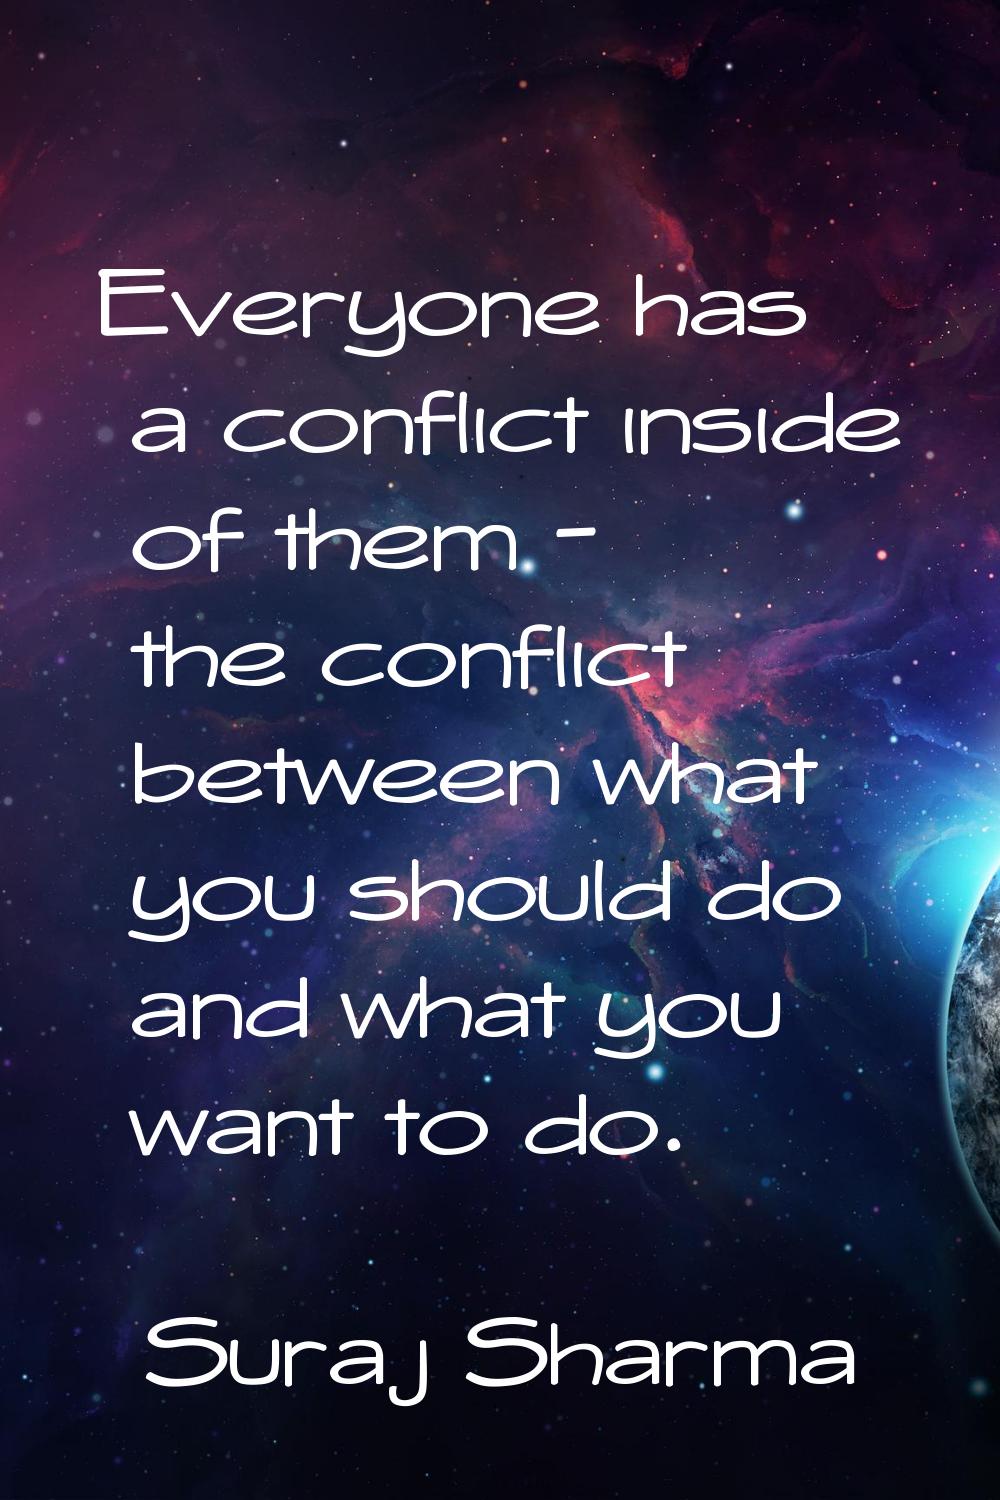 Everyone has a conflict inside of them - the conflict between what you should do and what you want 